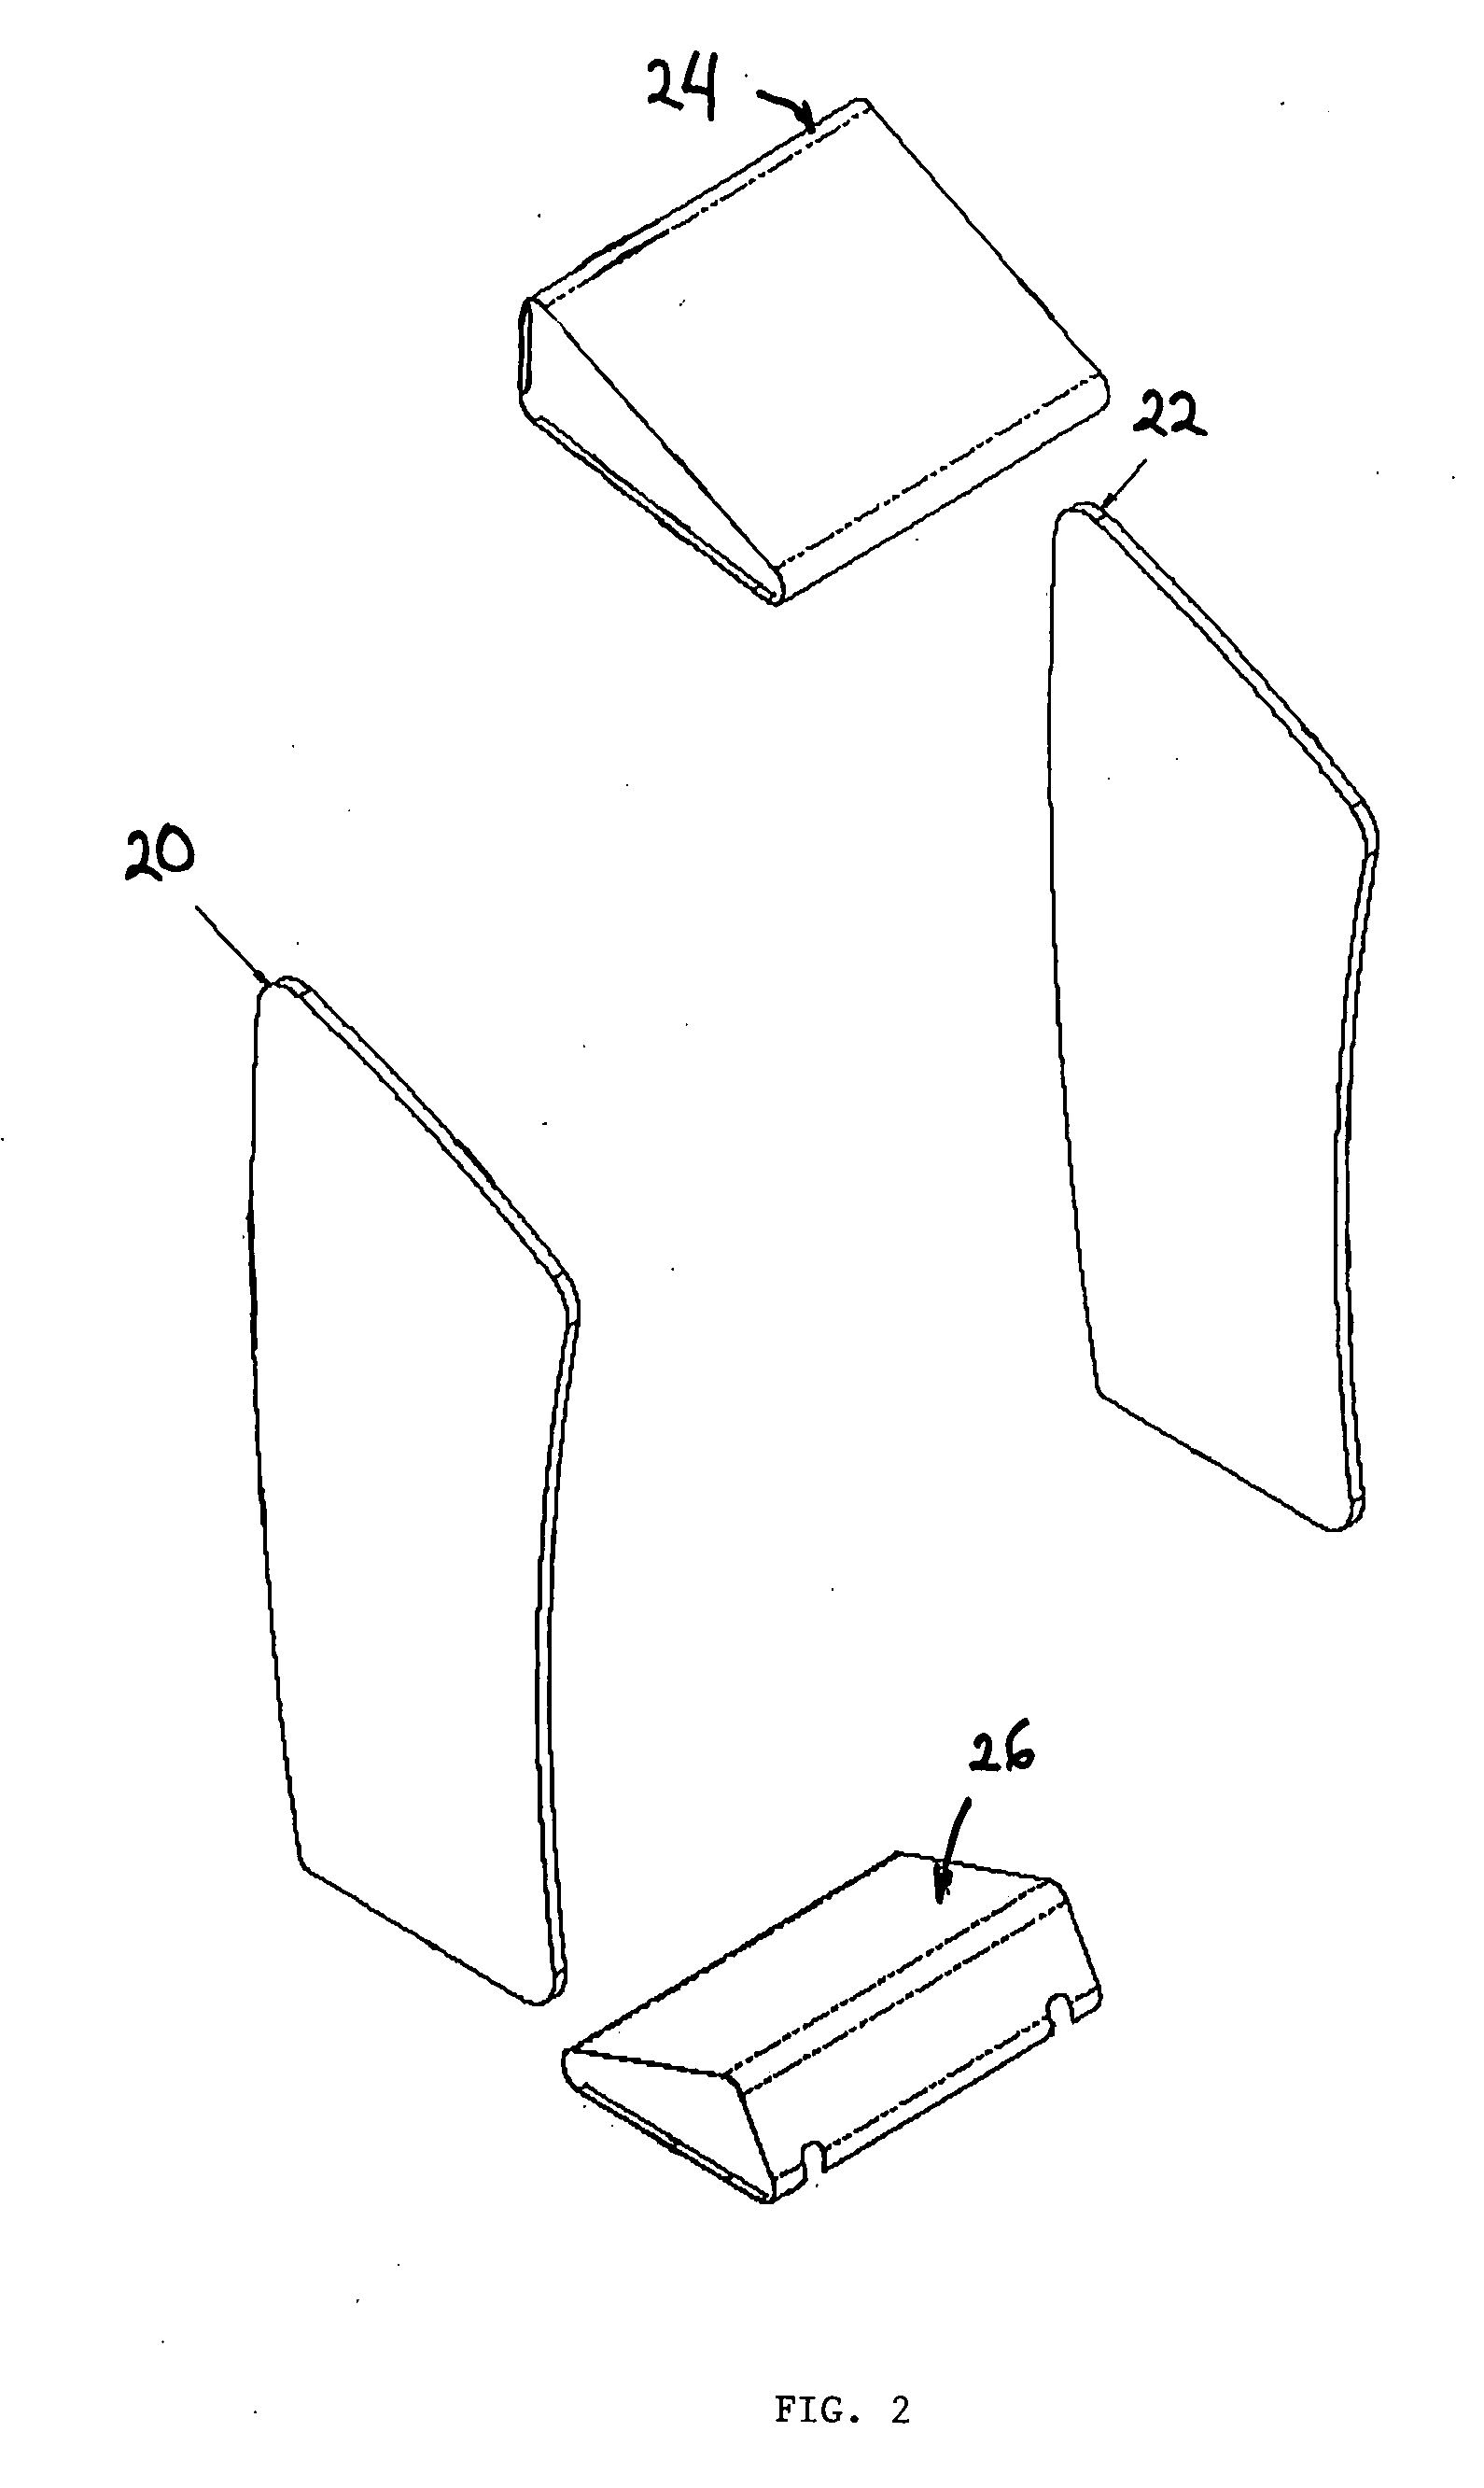 Loop-frame lectern with removable front panel